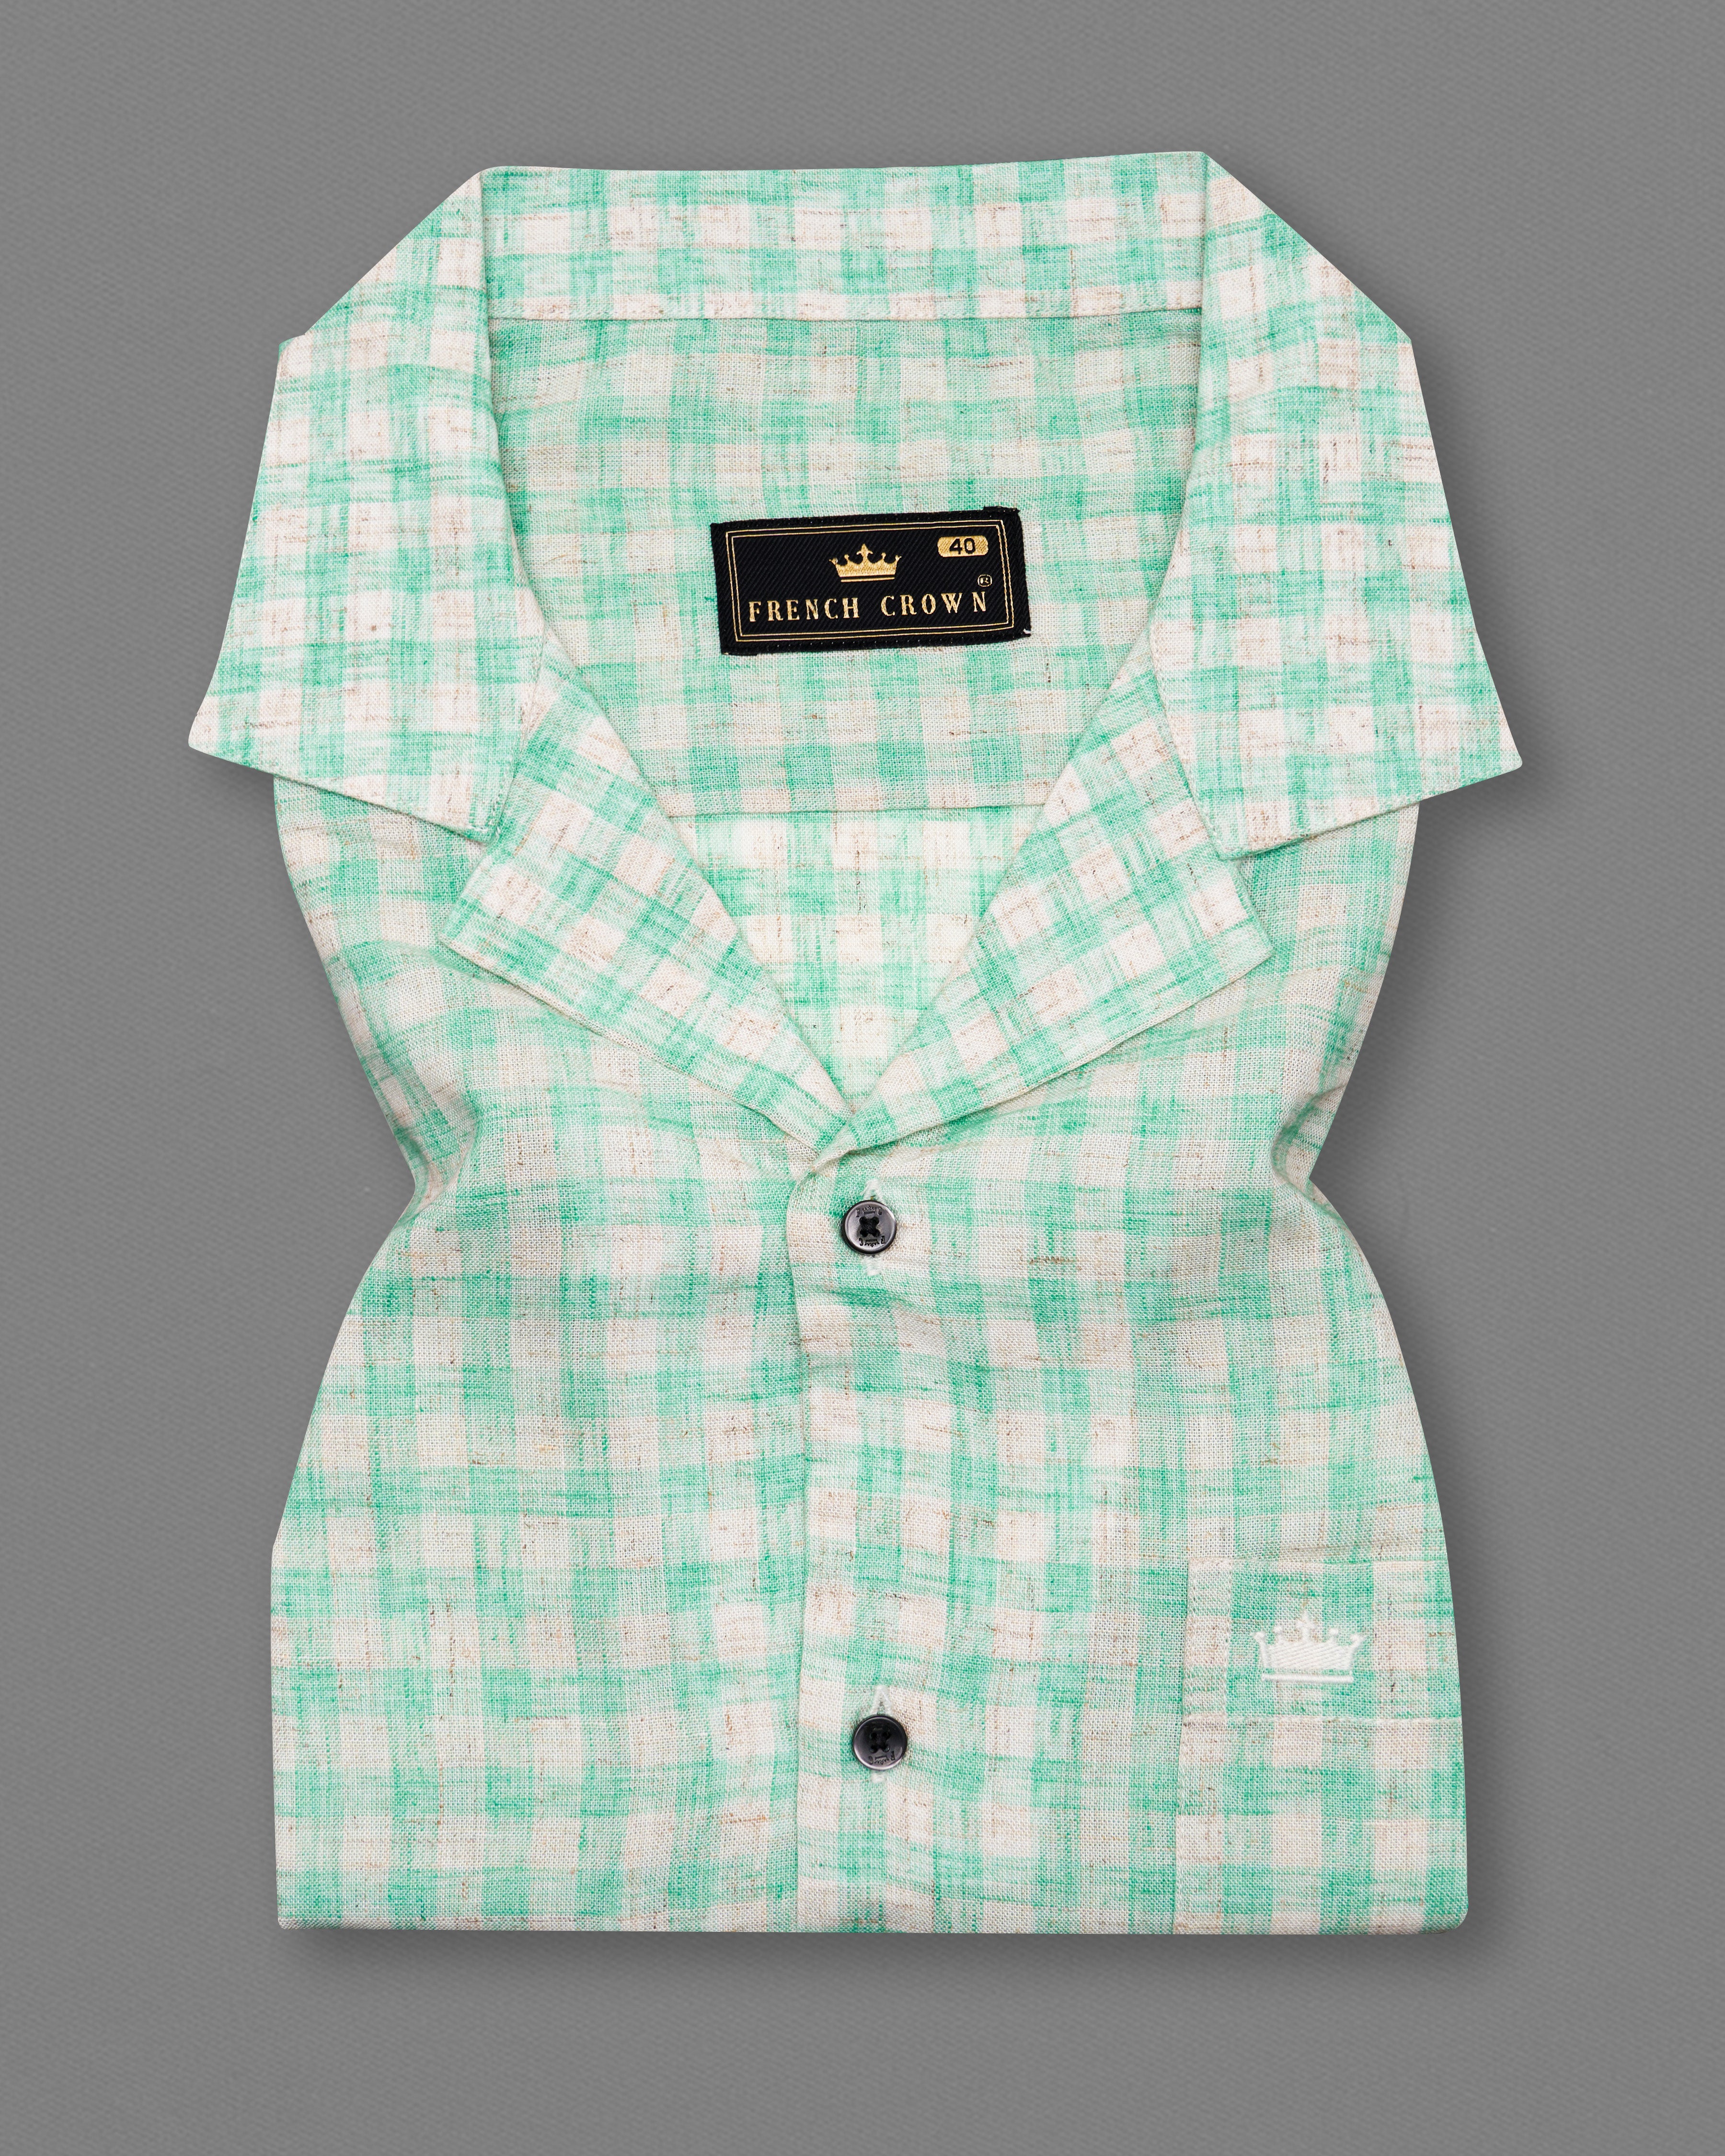 Turquoise Green and Mercury Gray Checkered Half-Sleeved Luxurious Linen Shirt 9699-CC-BLK-SS-38, 9699-CC-BLK-SS-39, 9699-CC-BLK-SS-40, 9699-CC-BLK-SS-42, 9699-CC-BLK-SS-44, 9699-CC-BLK-SS-46, 9699-CC-BLK-SS-48, 9699-CC-BLK-SS-50, 9699-CC-BLK-SS-52